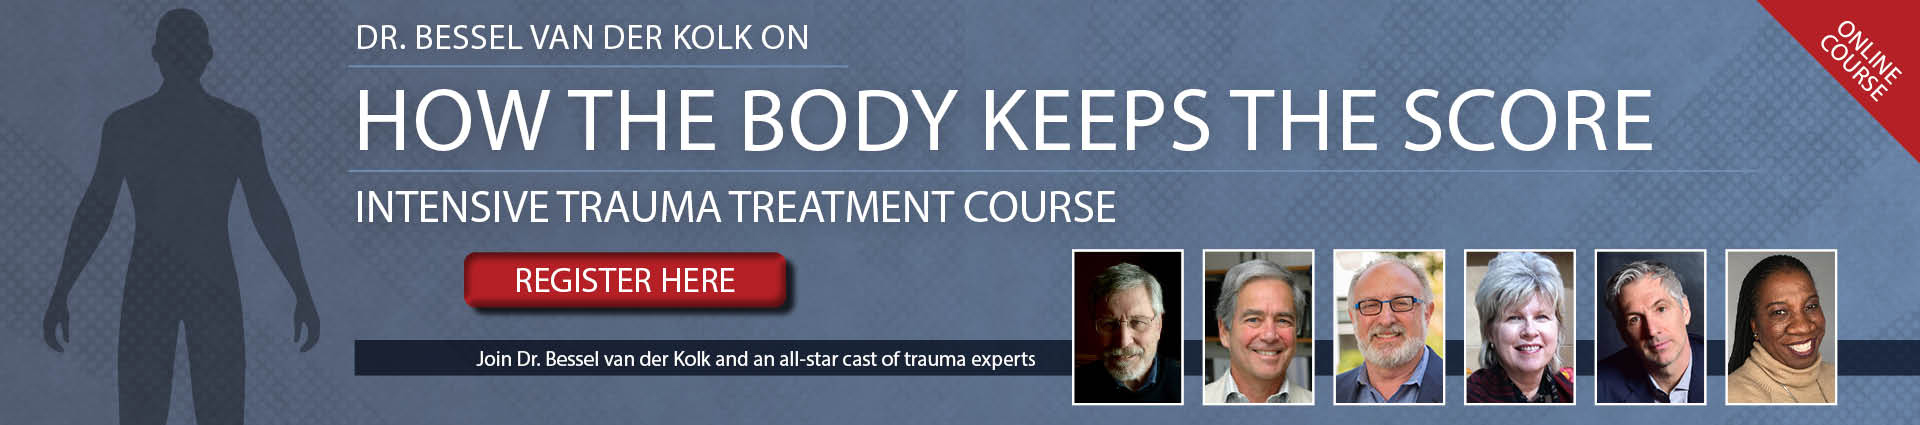 The Body Keeps the Score Online Course